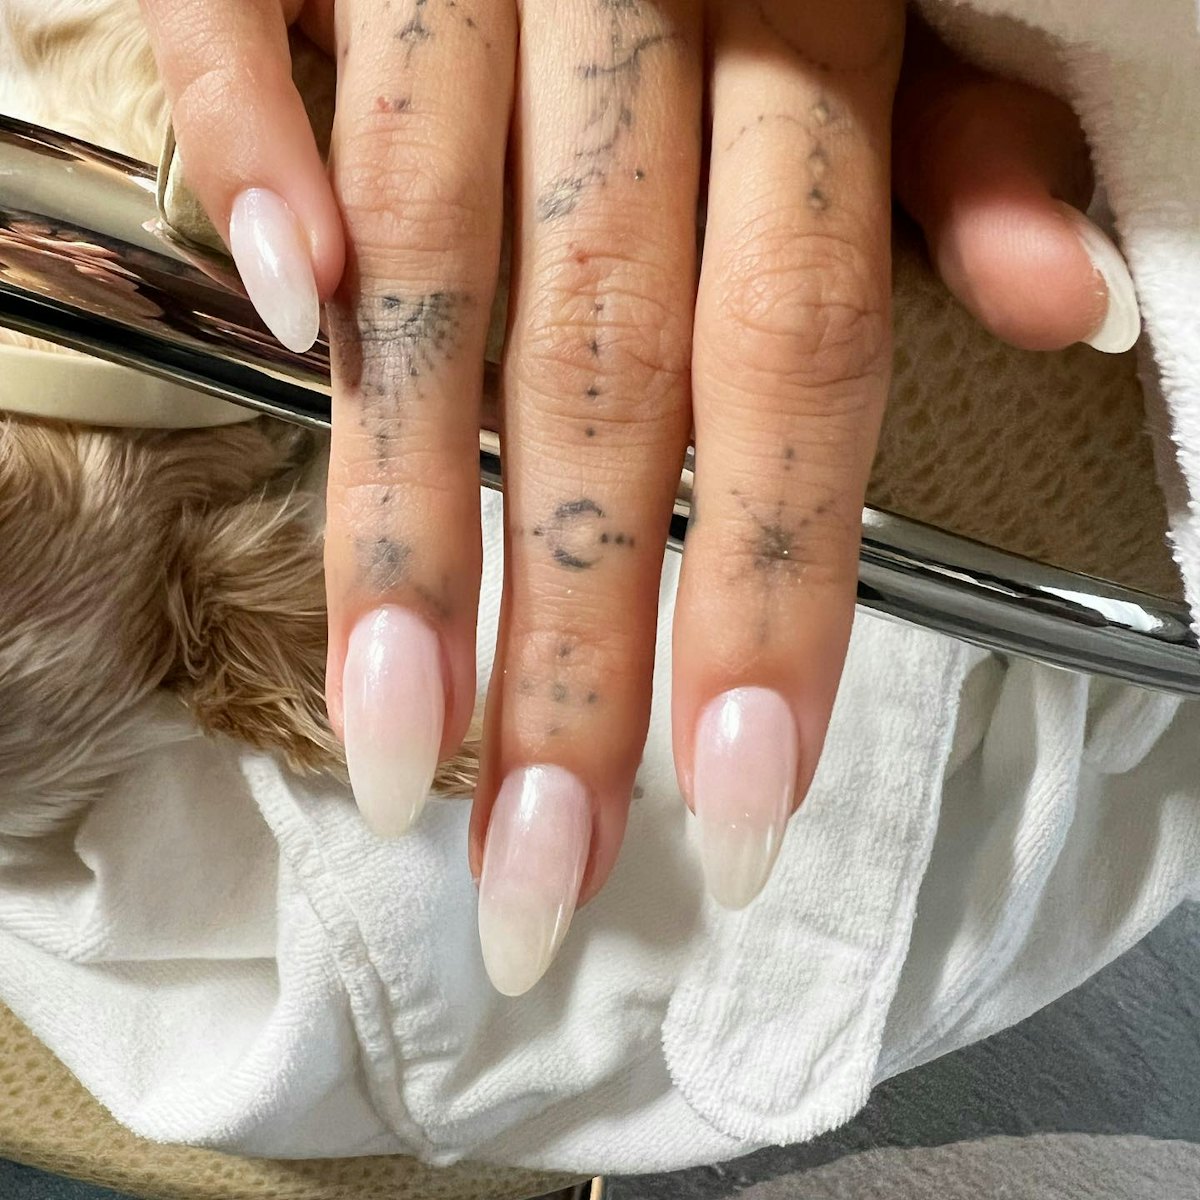 Hailey Bieber's glazed donut nails were one of the best celebrity nail art moments in 2022.